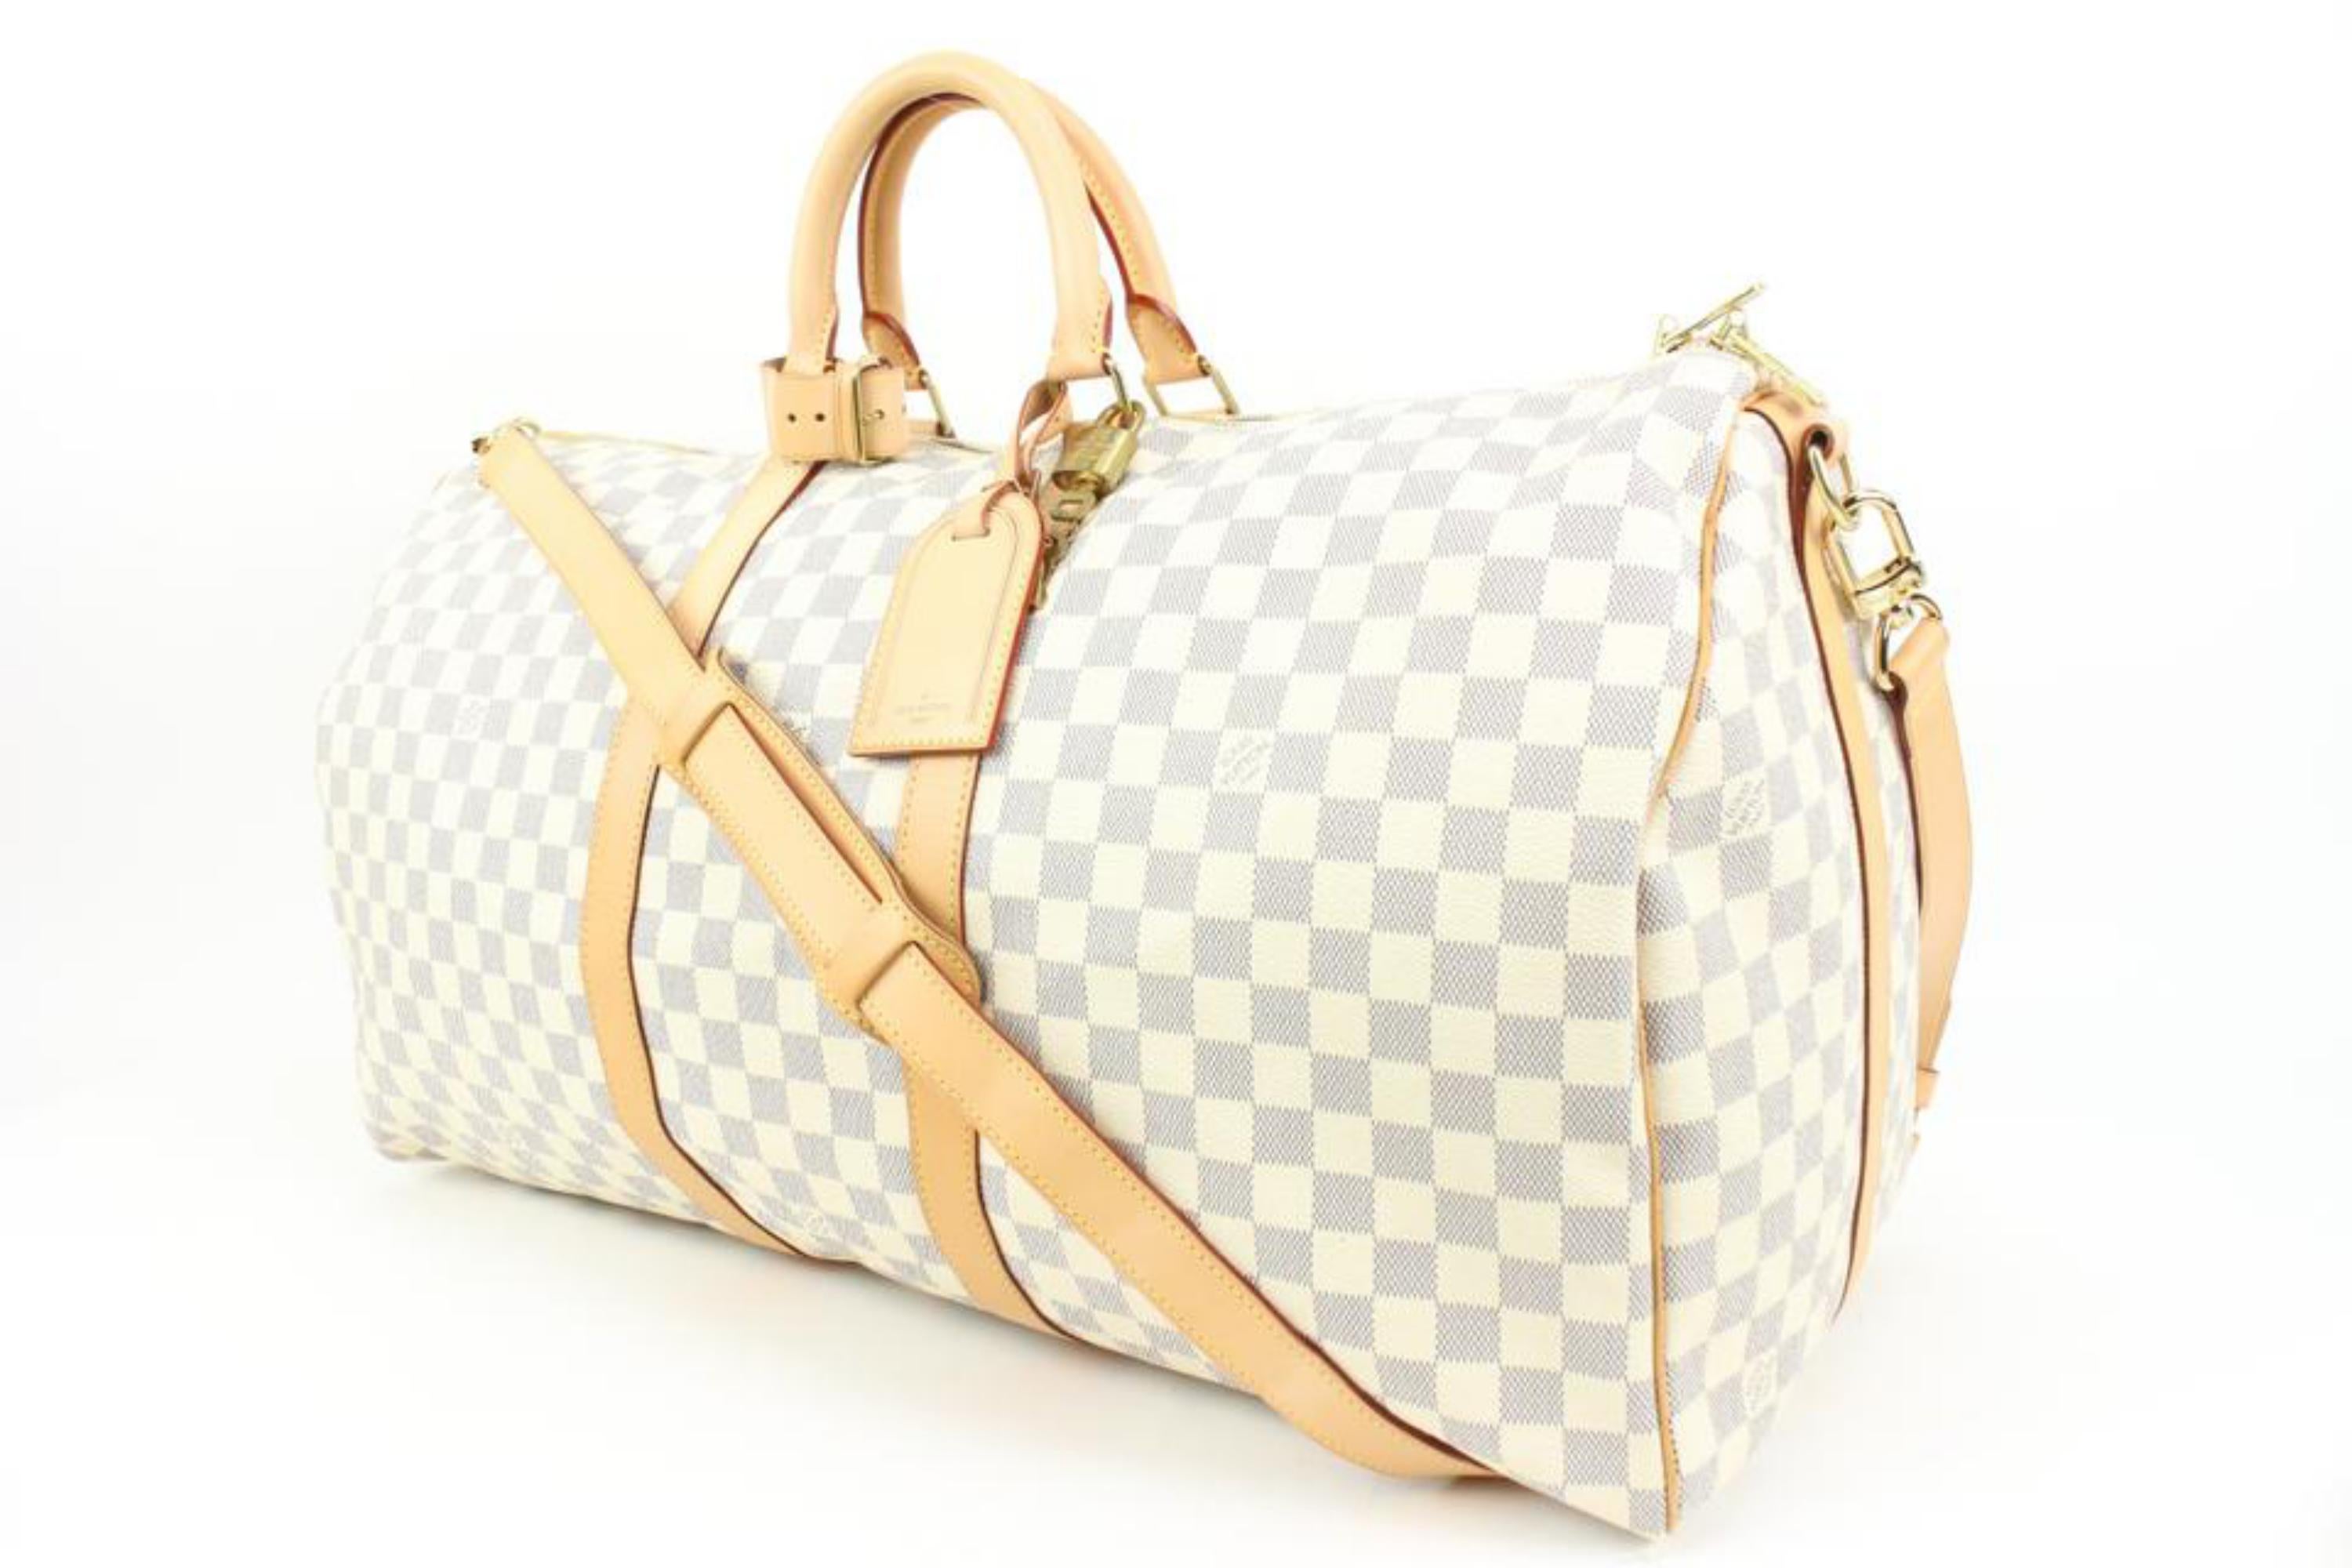 Louis Vuitton Damier Azur Keepall Bandouliere 55 Duffle with Strap 44lk96
Date Code/Serial Number: MB0089
Made In: France
Measurements: Length:  22